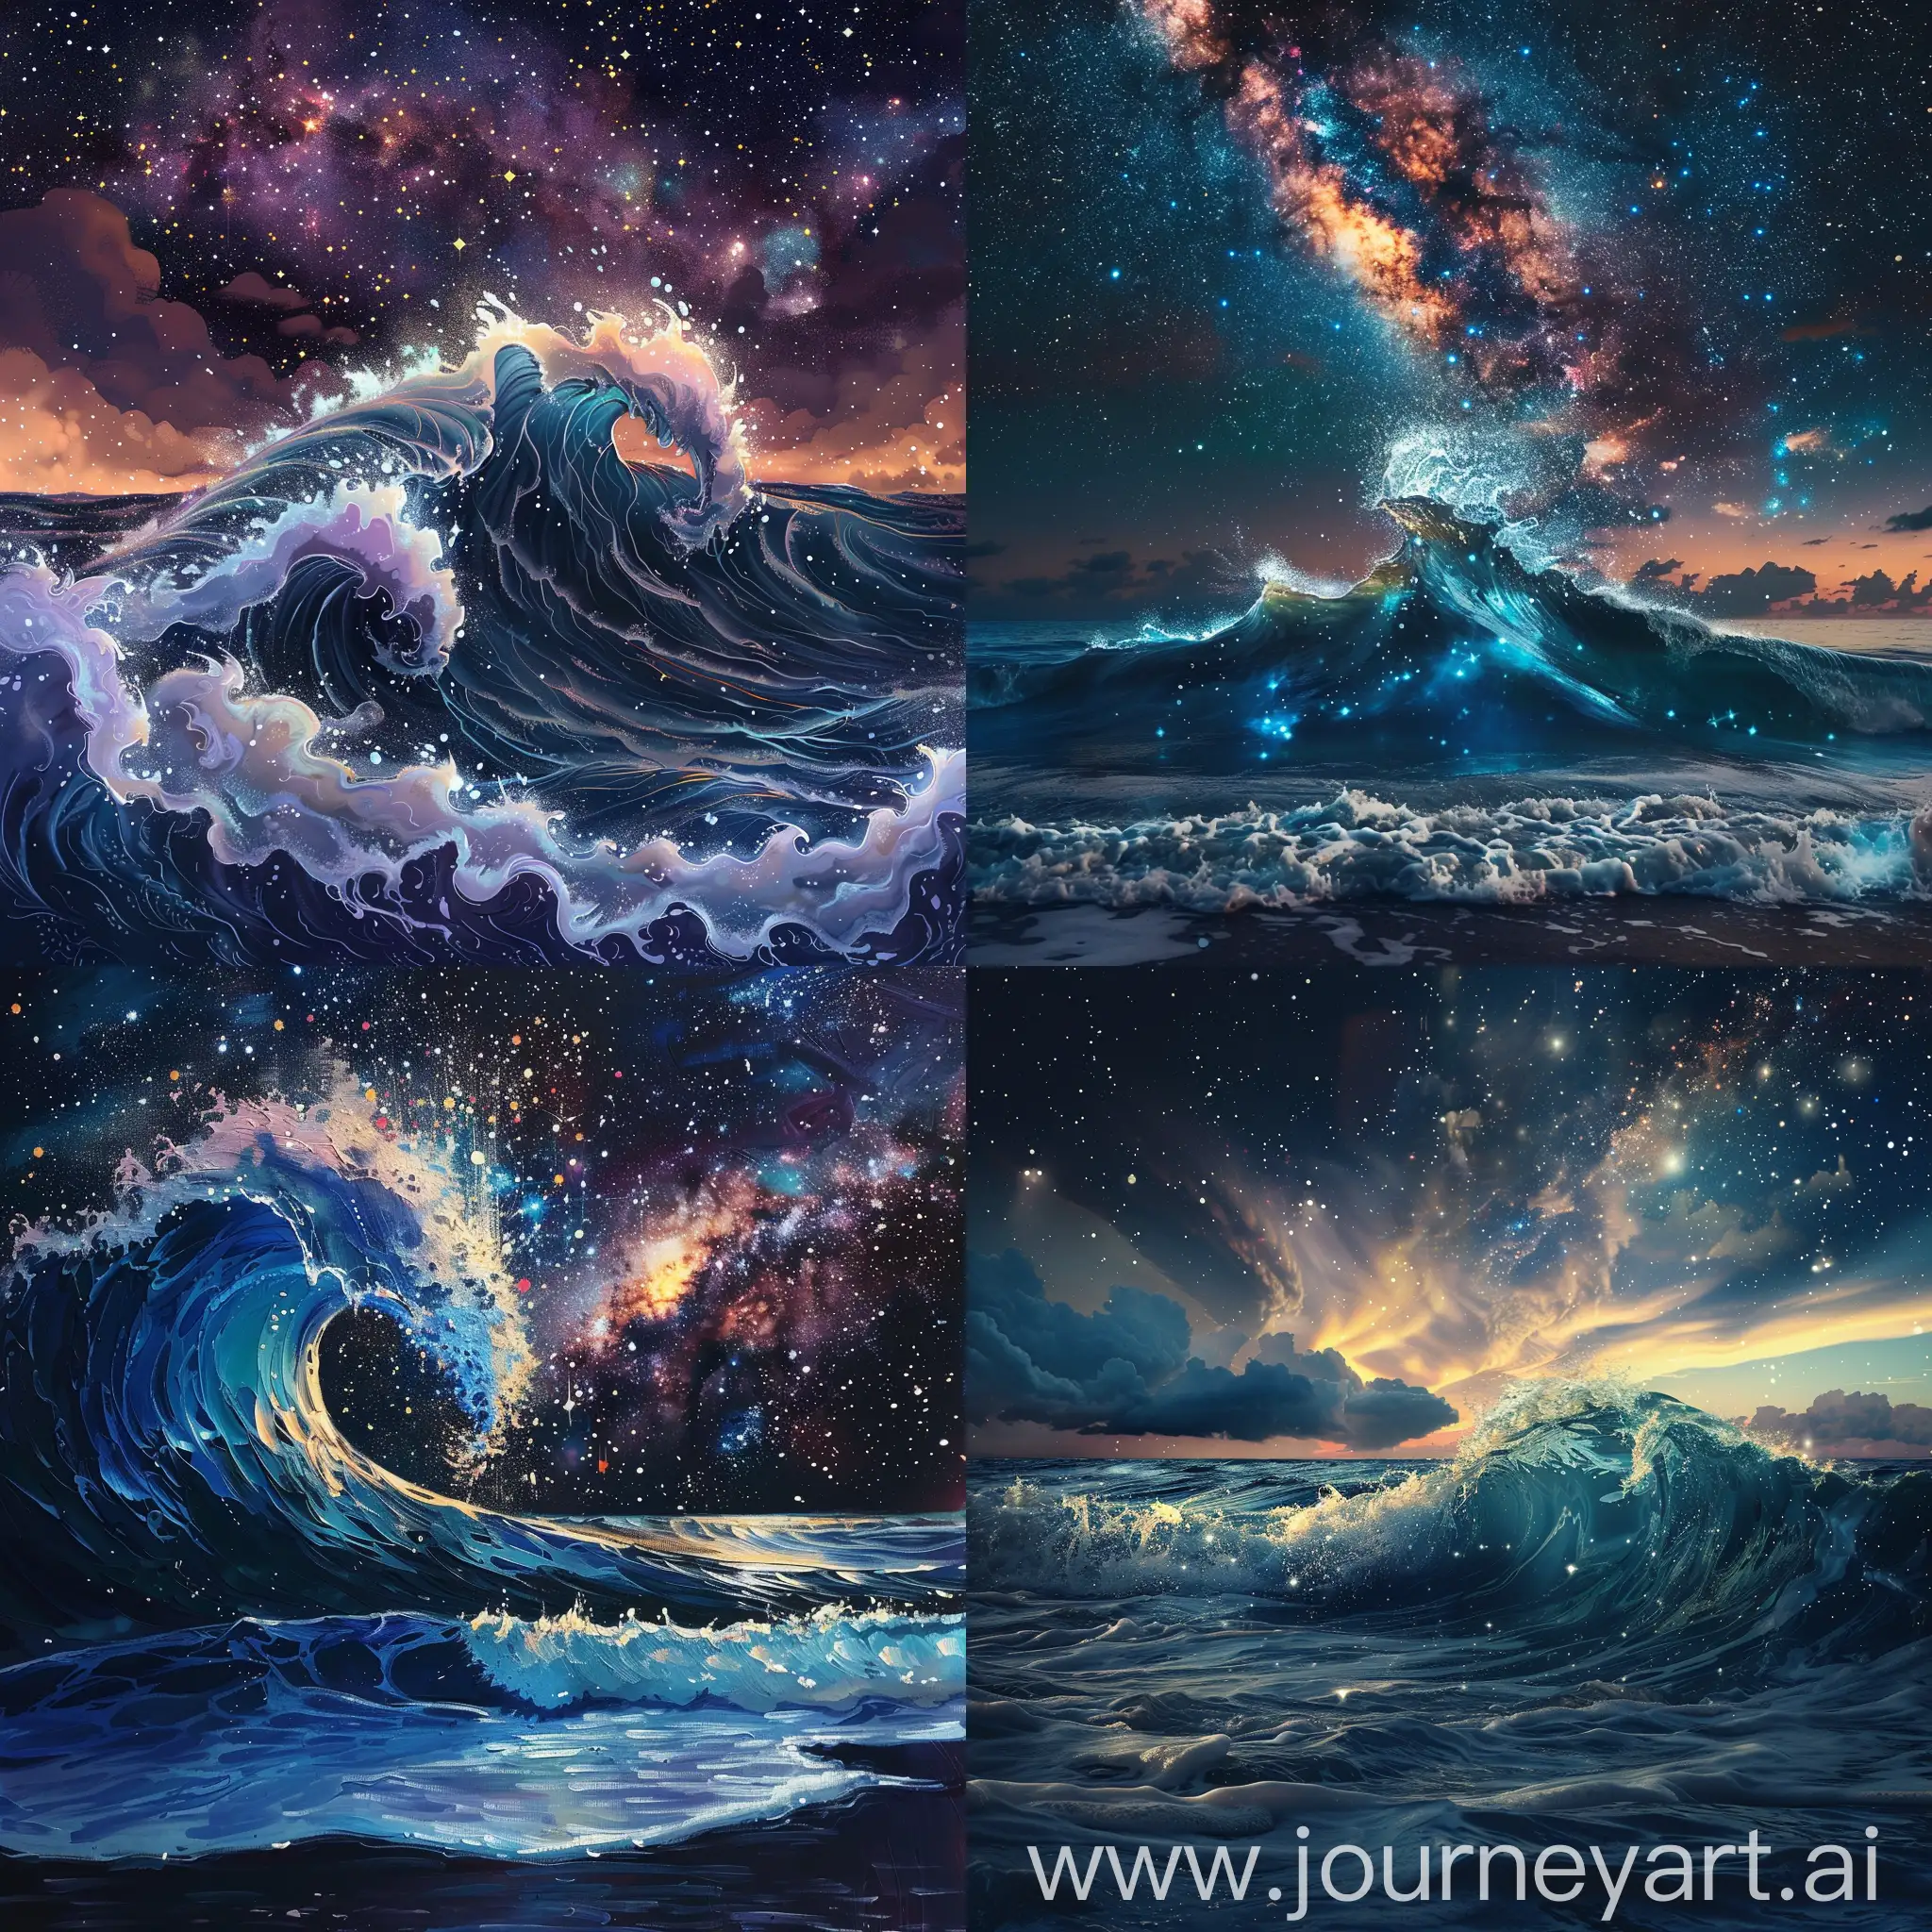 make a ocean wave that is peaceful, make the night stary and galexy like